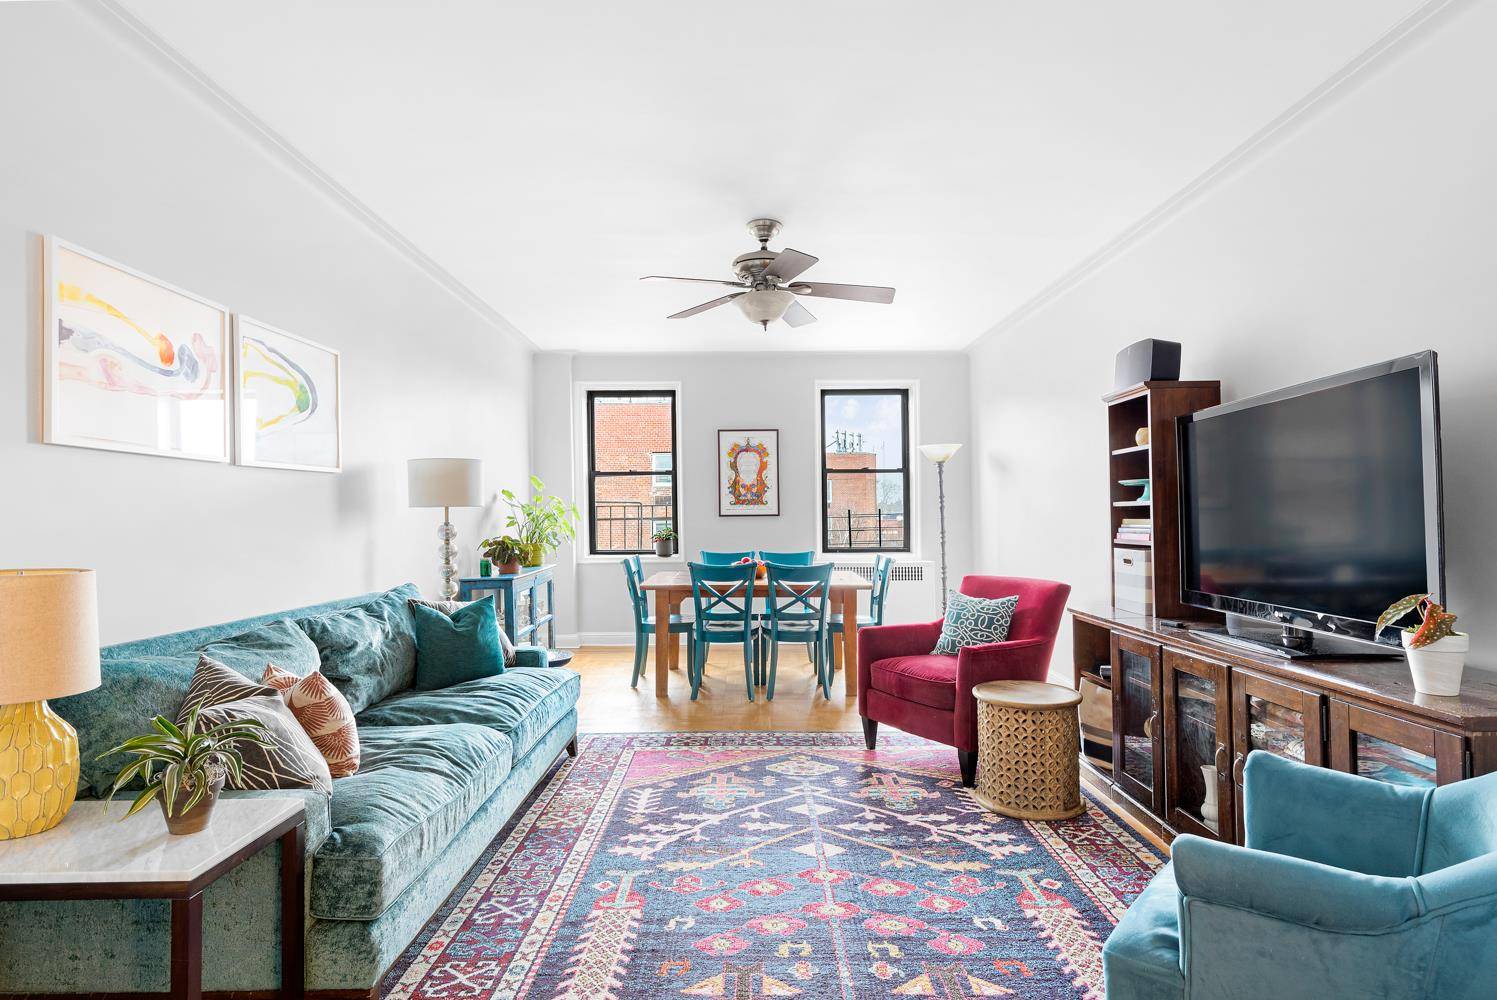 This exceedingly spacious top floor two bedroom, two bath apartment in a desirable Ditmas Park location is the kind of home that rarely comes on the market.